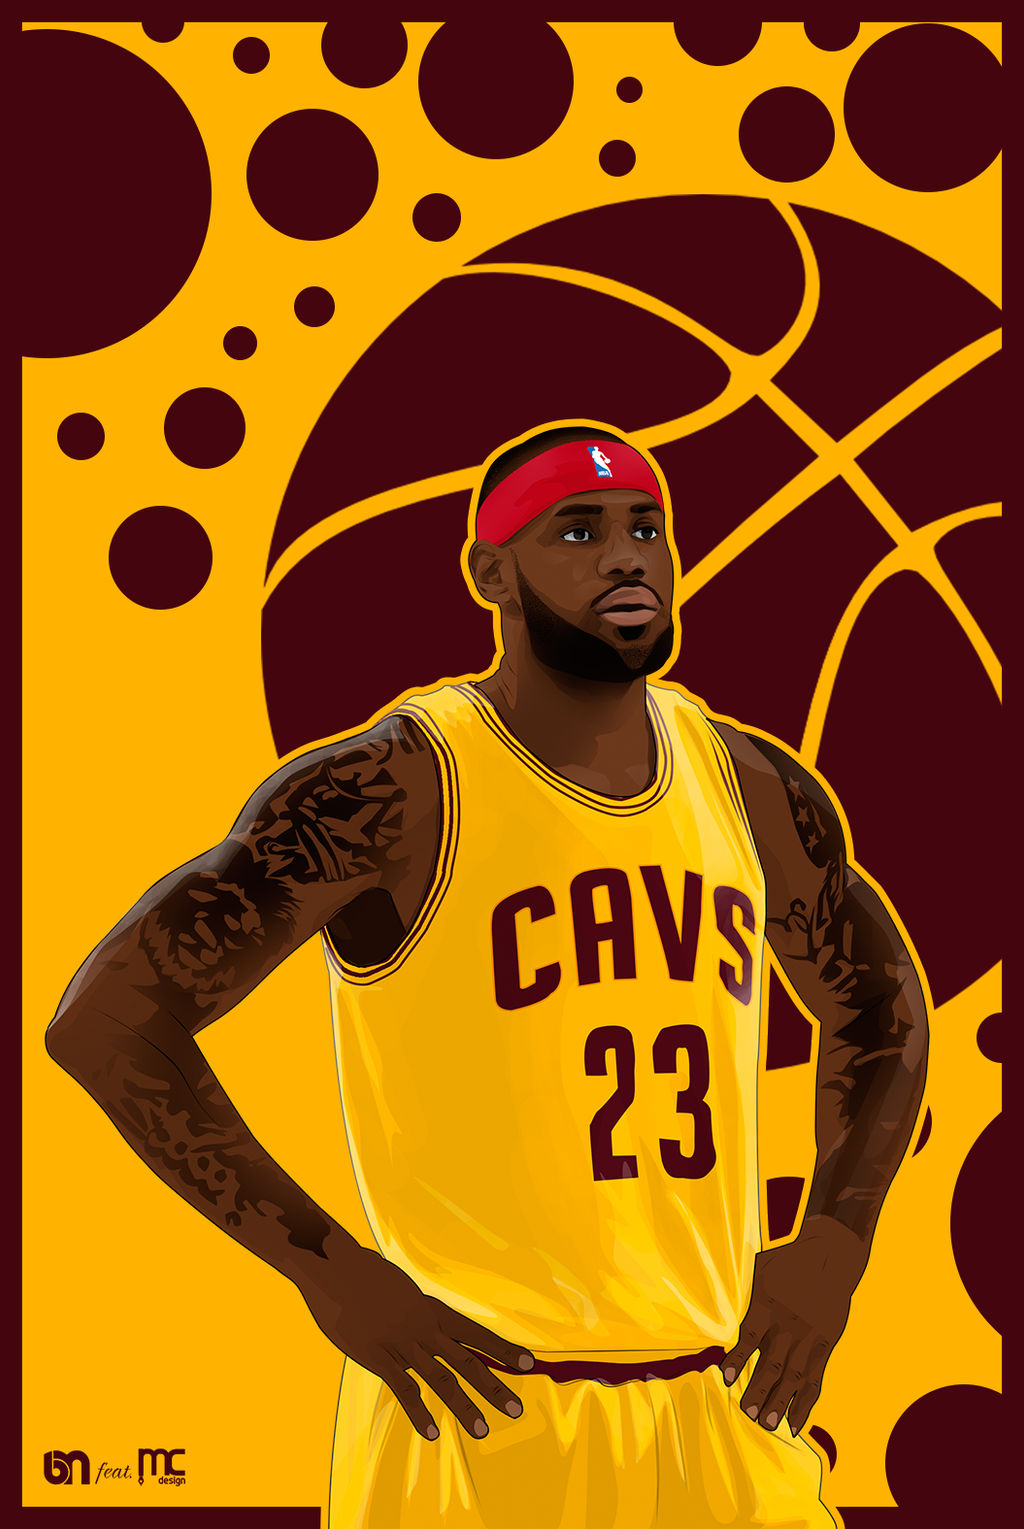 Lebron James: Over 47 Royalty-Free Licensable Stock Vectors & Vector Art